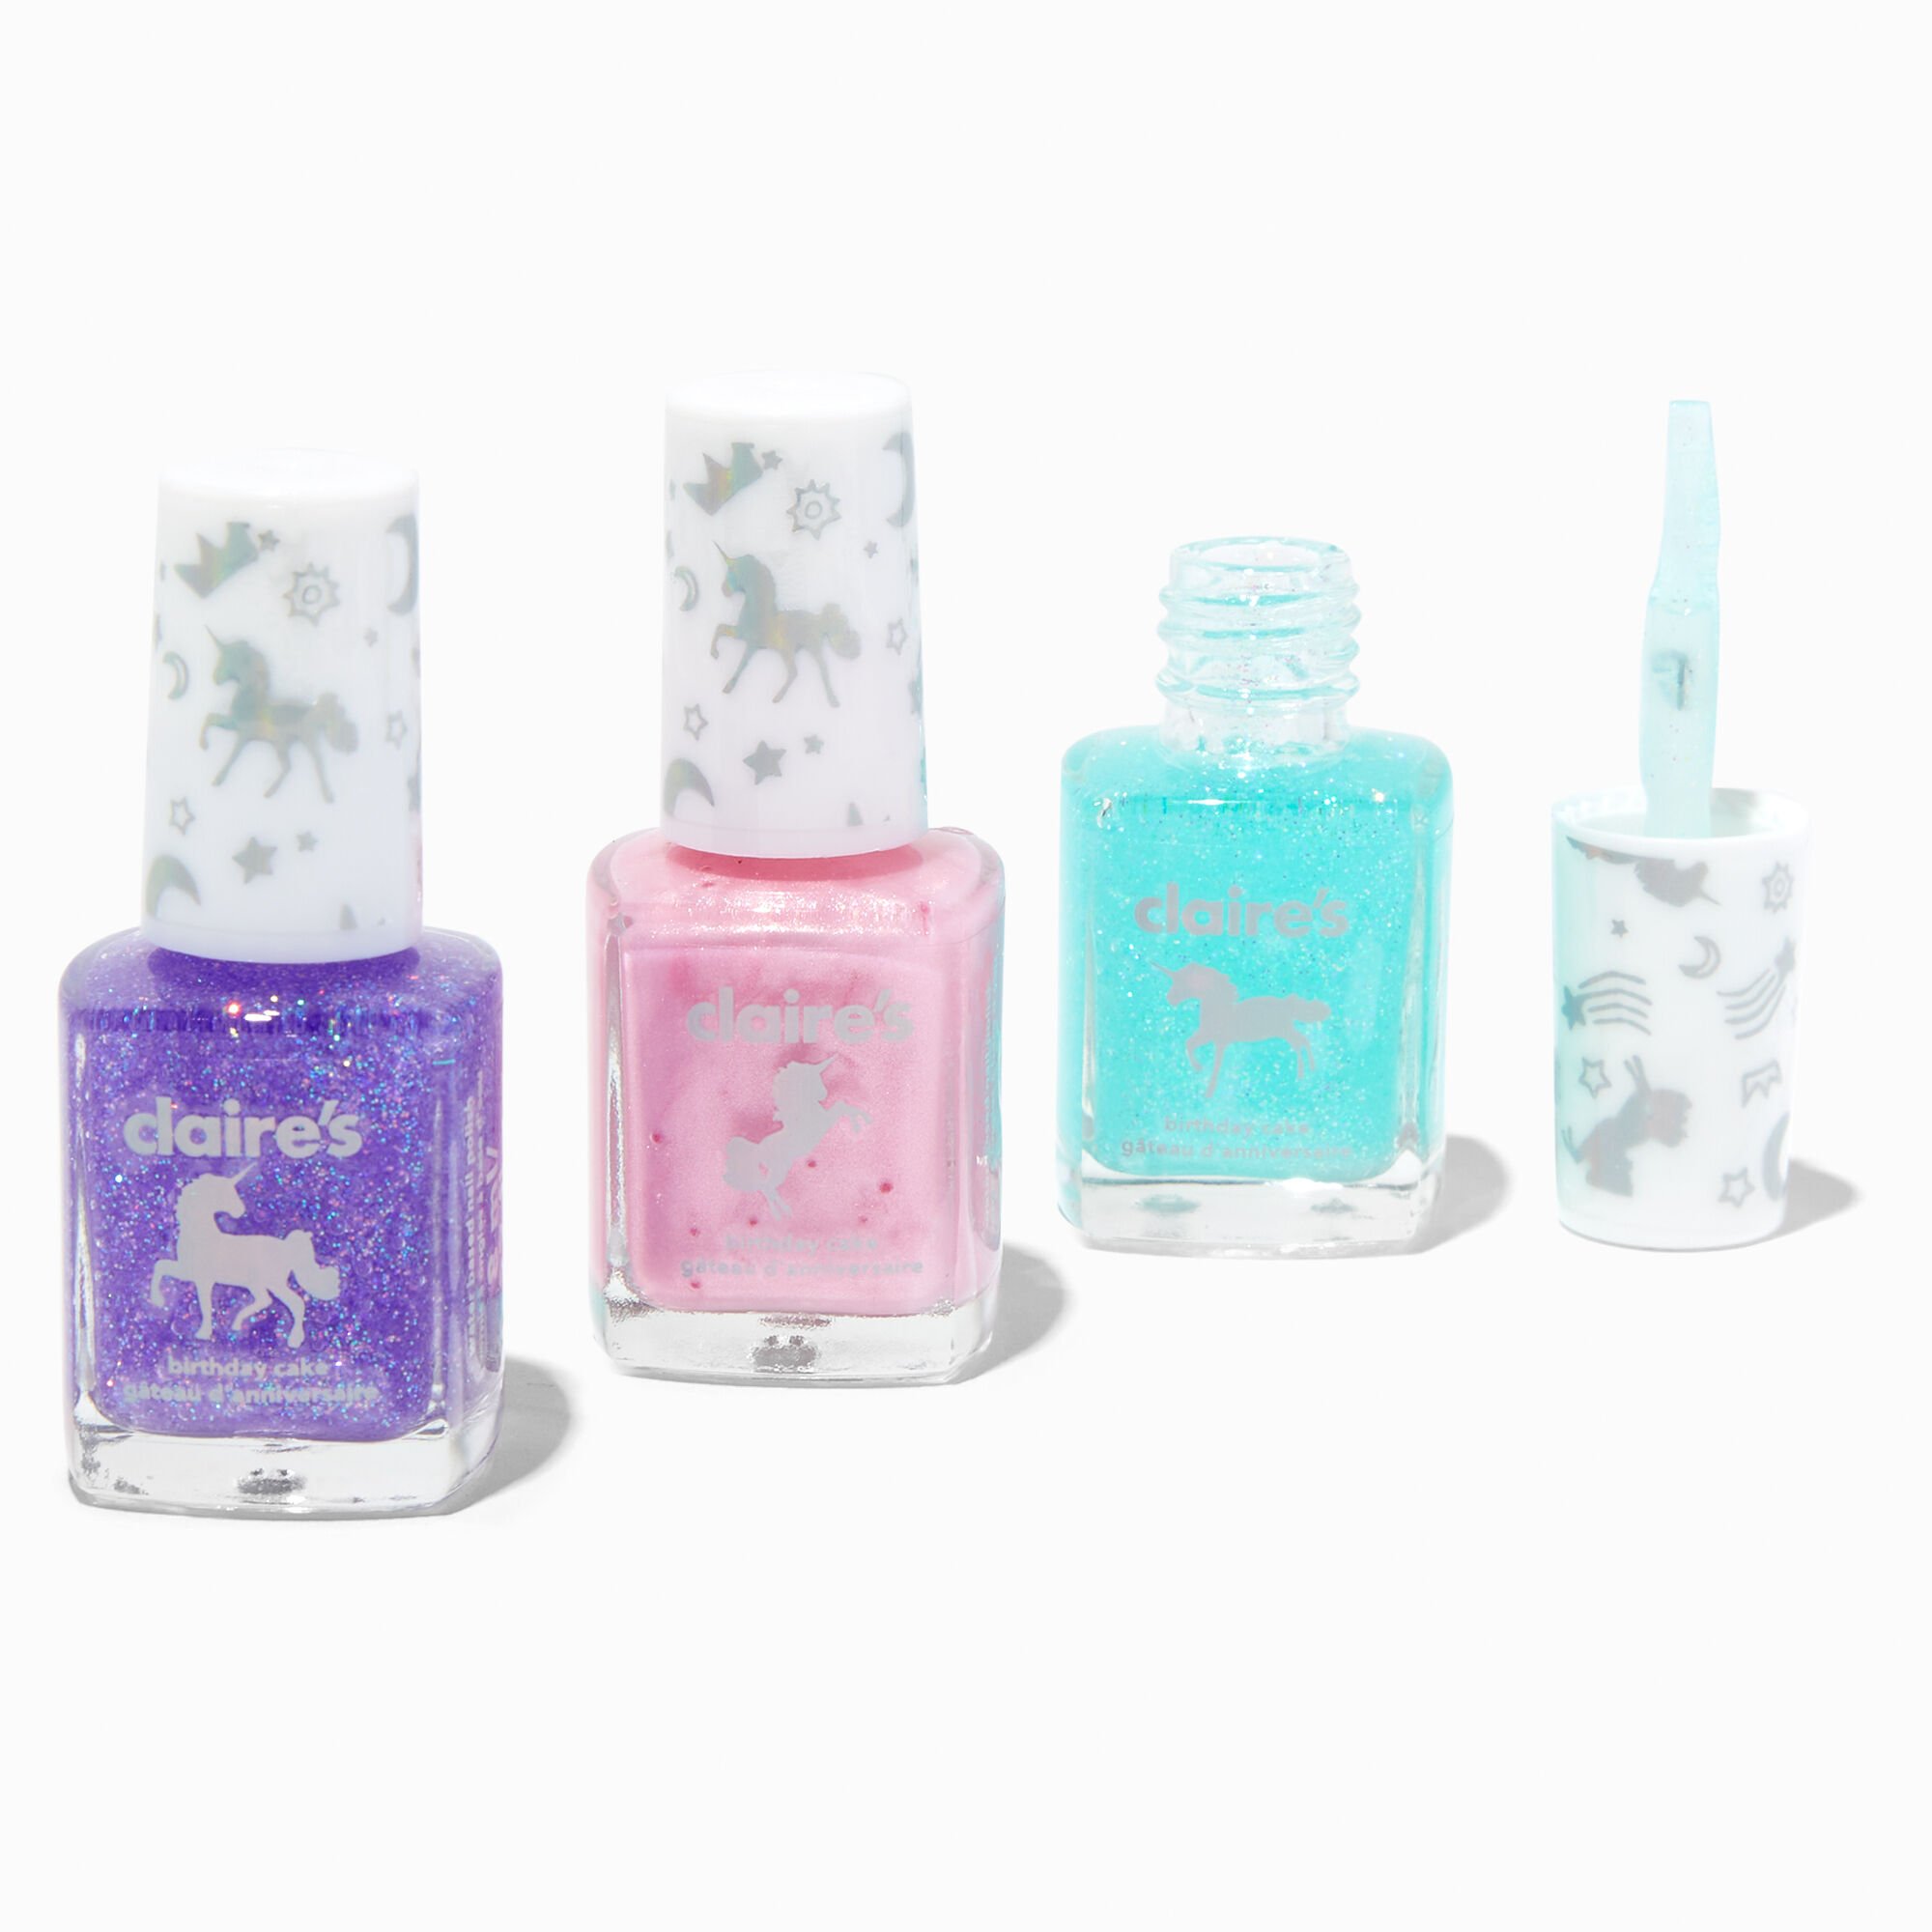 View Claires Unicorn Glitter Scented Nail Polish Set 3 Pack Pink information